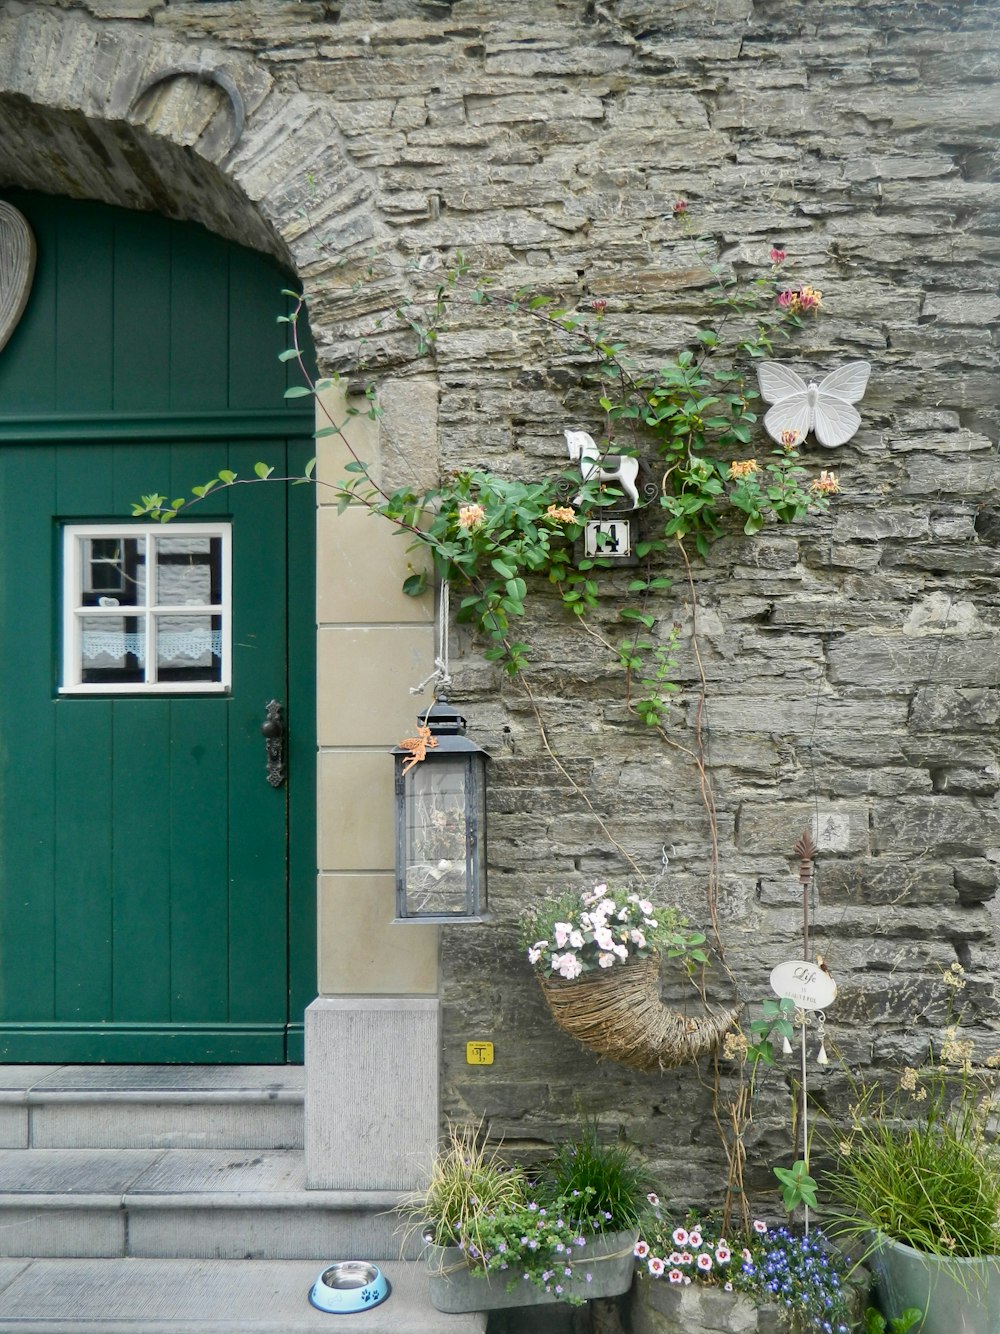 a stone building with a green door and window